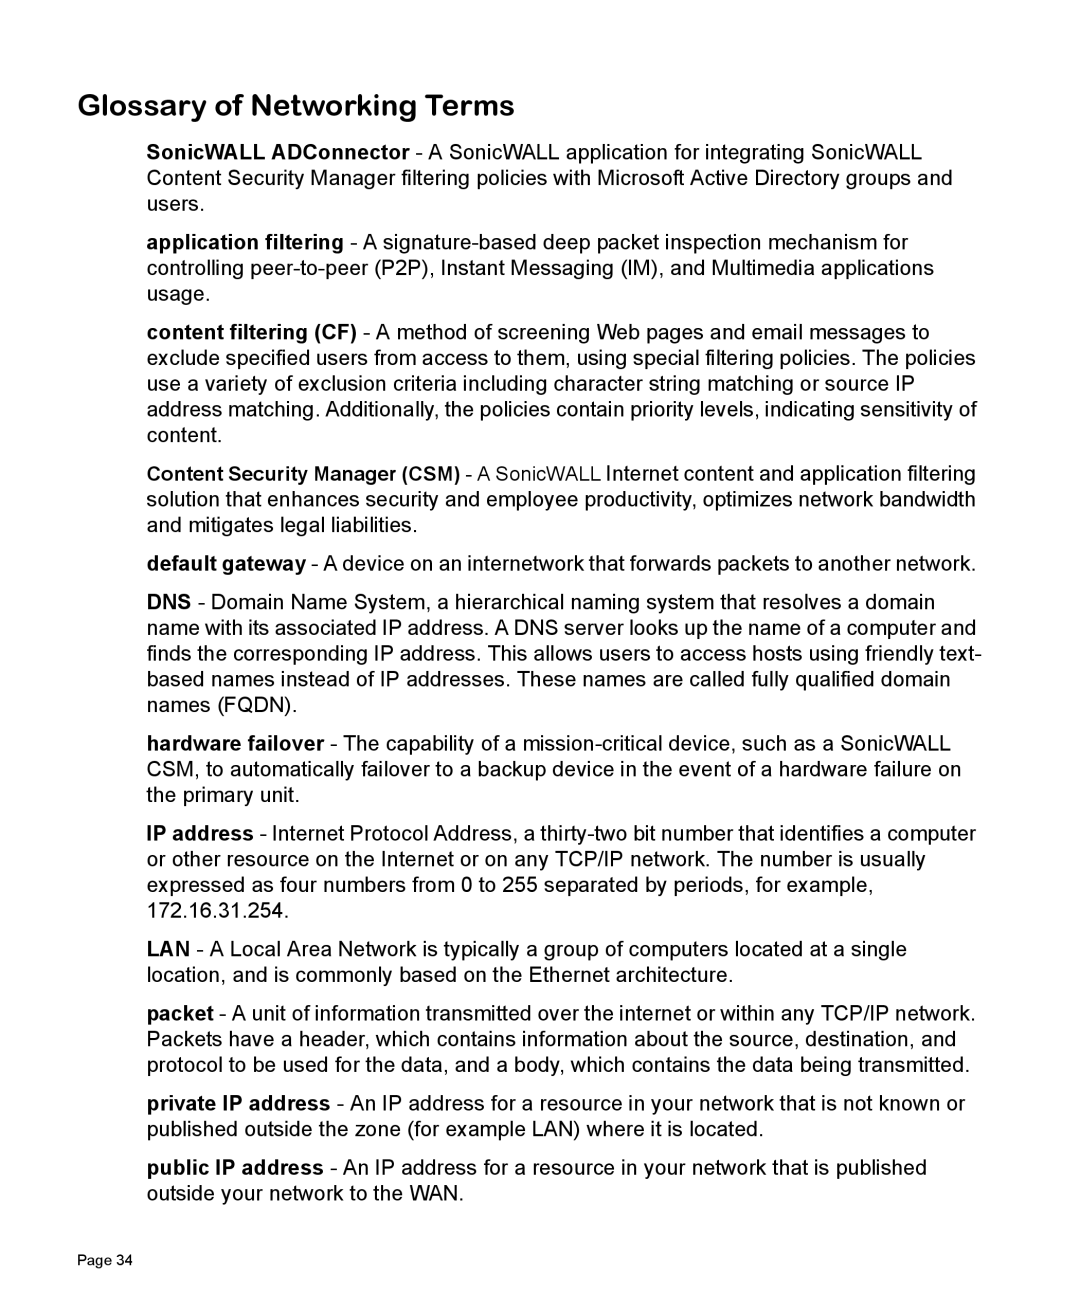 SonicWALL 2200 manual Glossary of Networking Terms 